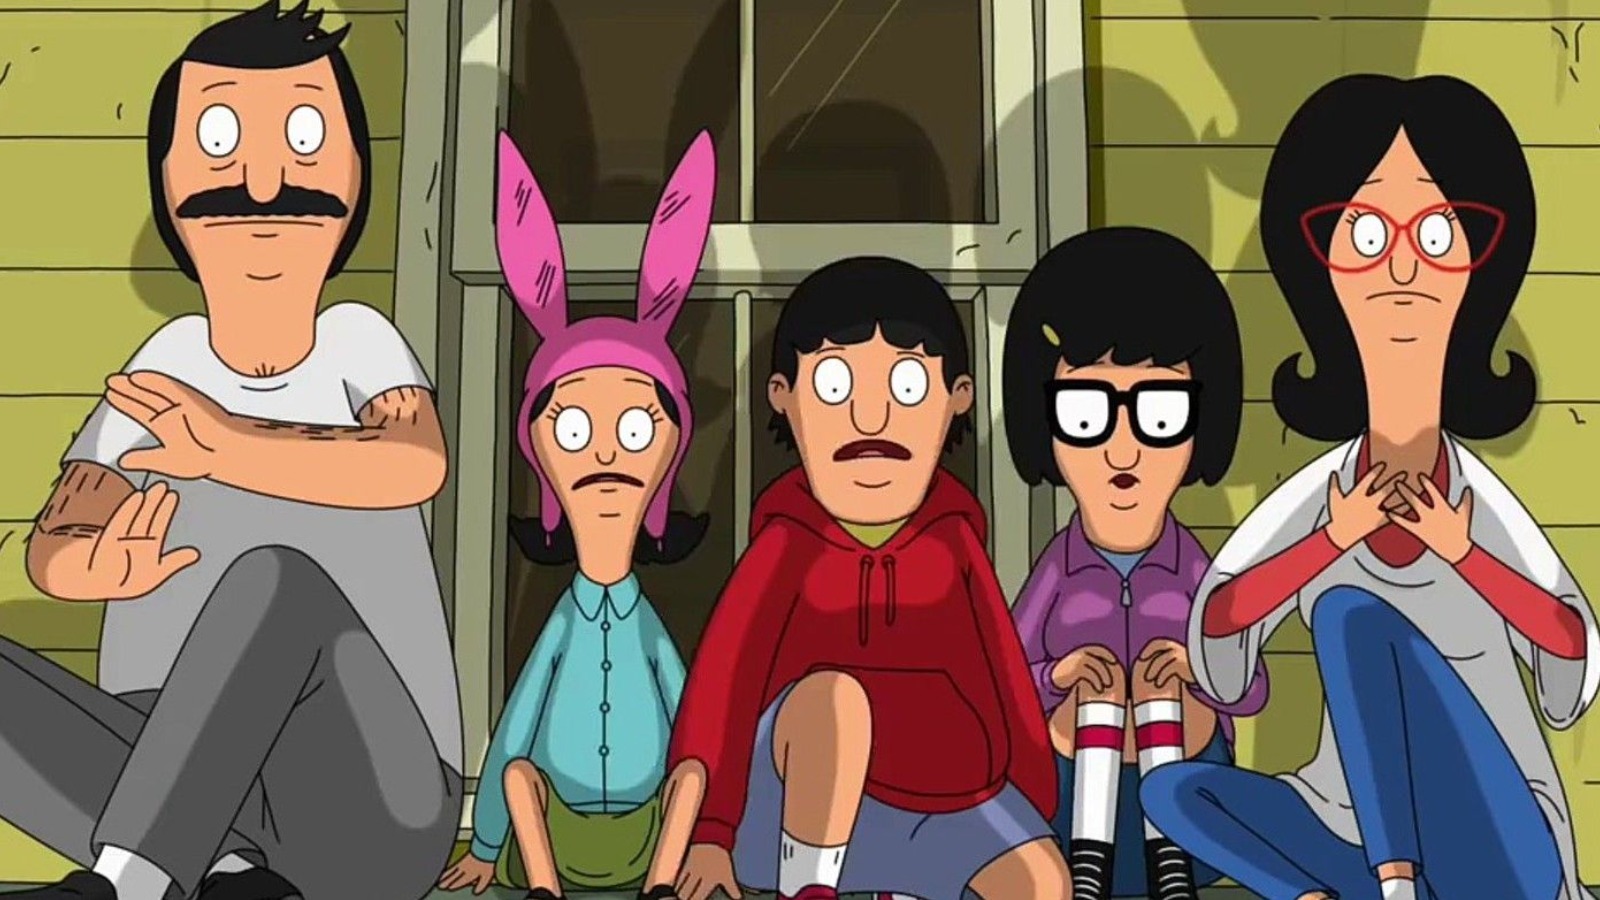 The Daily Stream: Bob's Burgers Serves Up Offbeat, Wholesome Fun